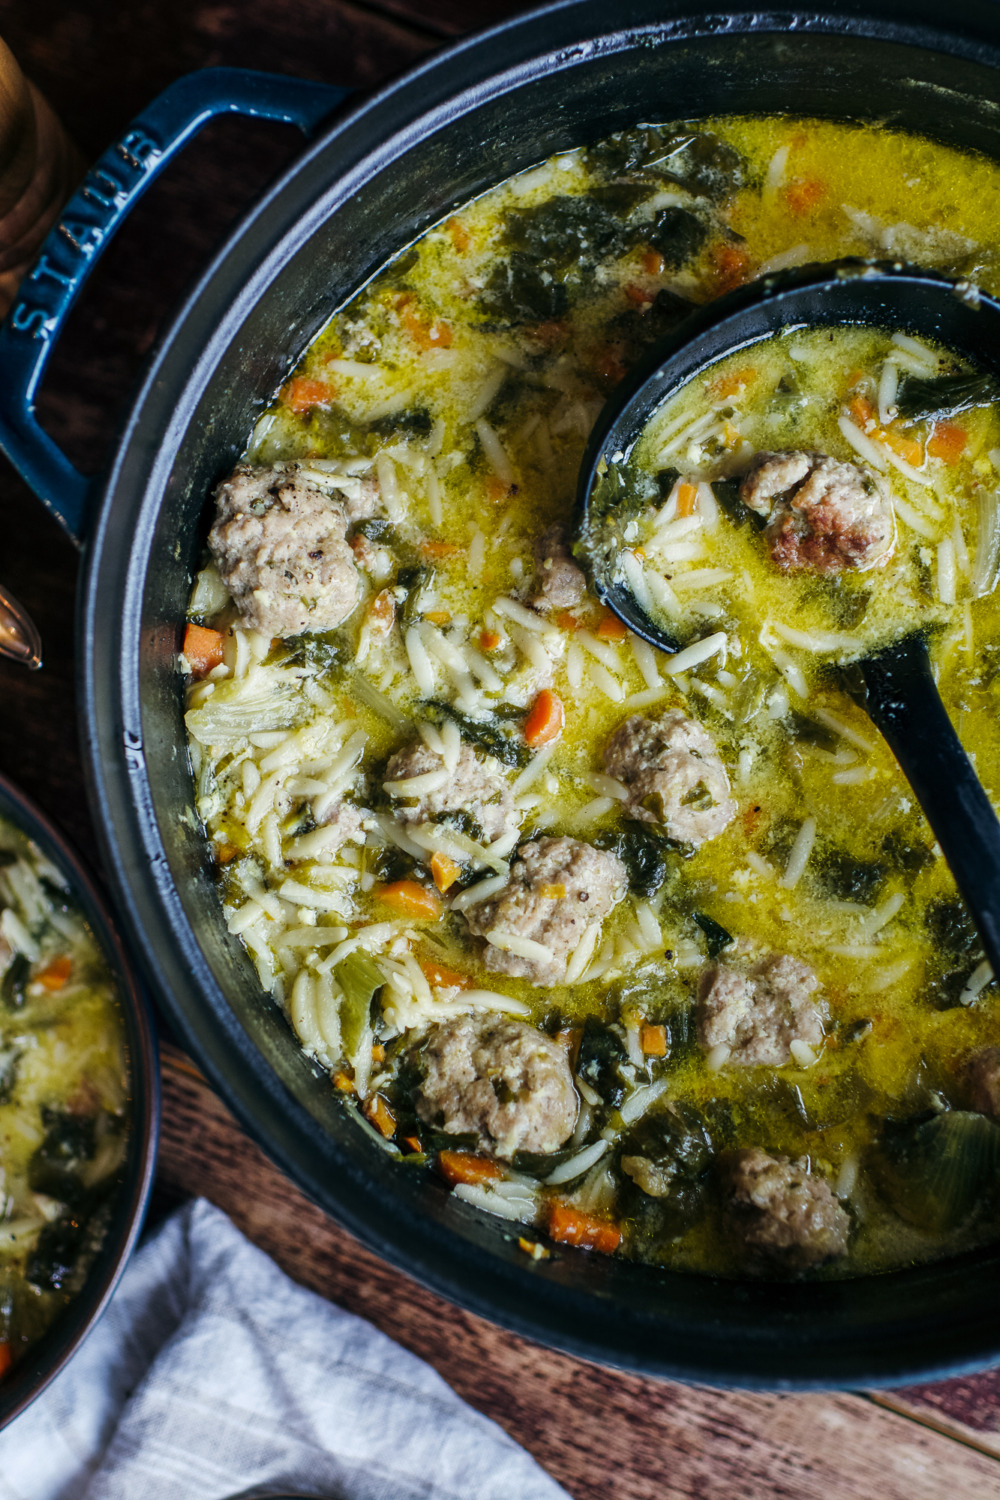 https://ciaochowbambina.com/wp-content/uploads/2022/10/Italian-Wedding-Soup-with-Orzo-2-of-10-2-of-1.jpg